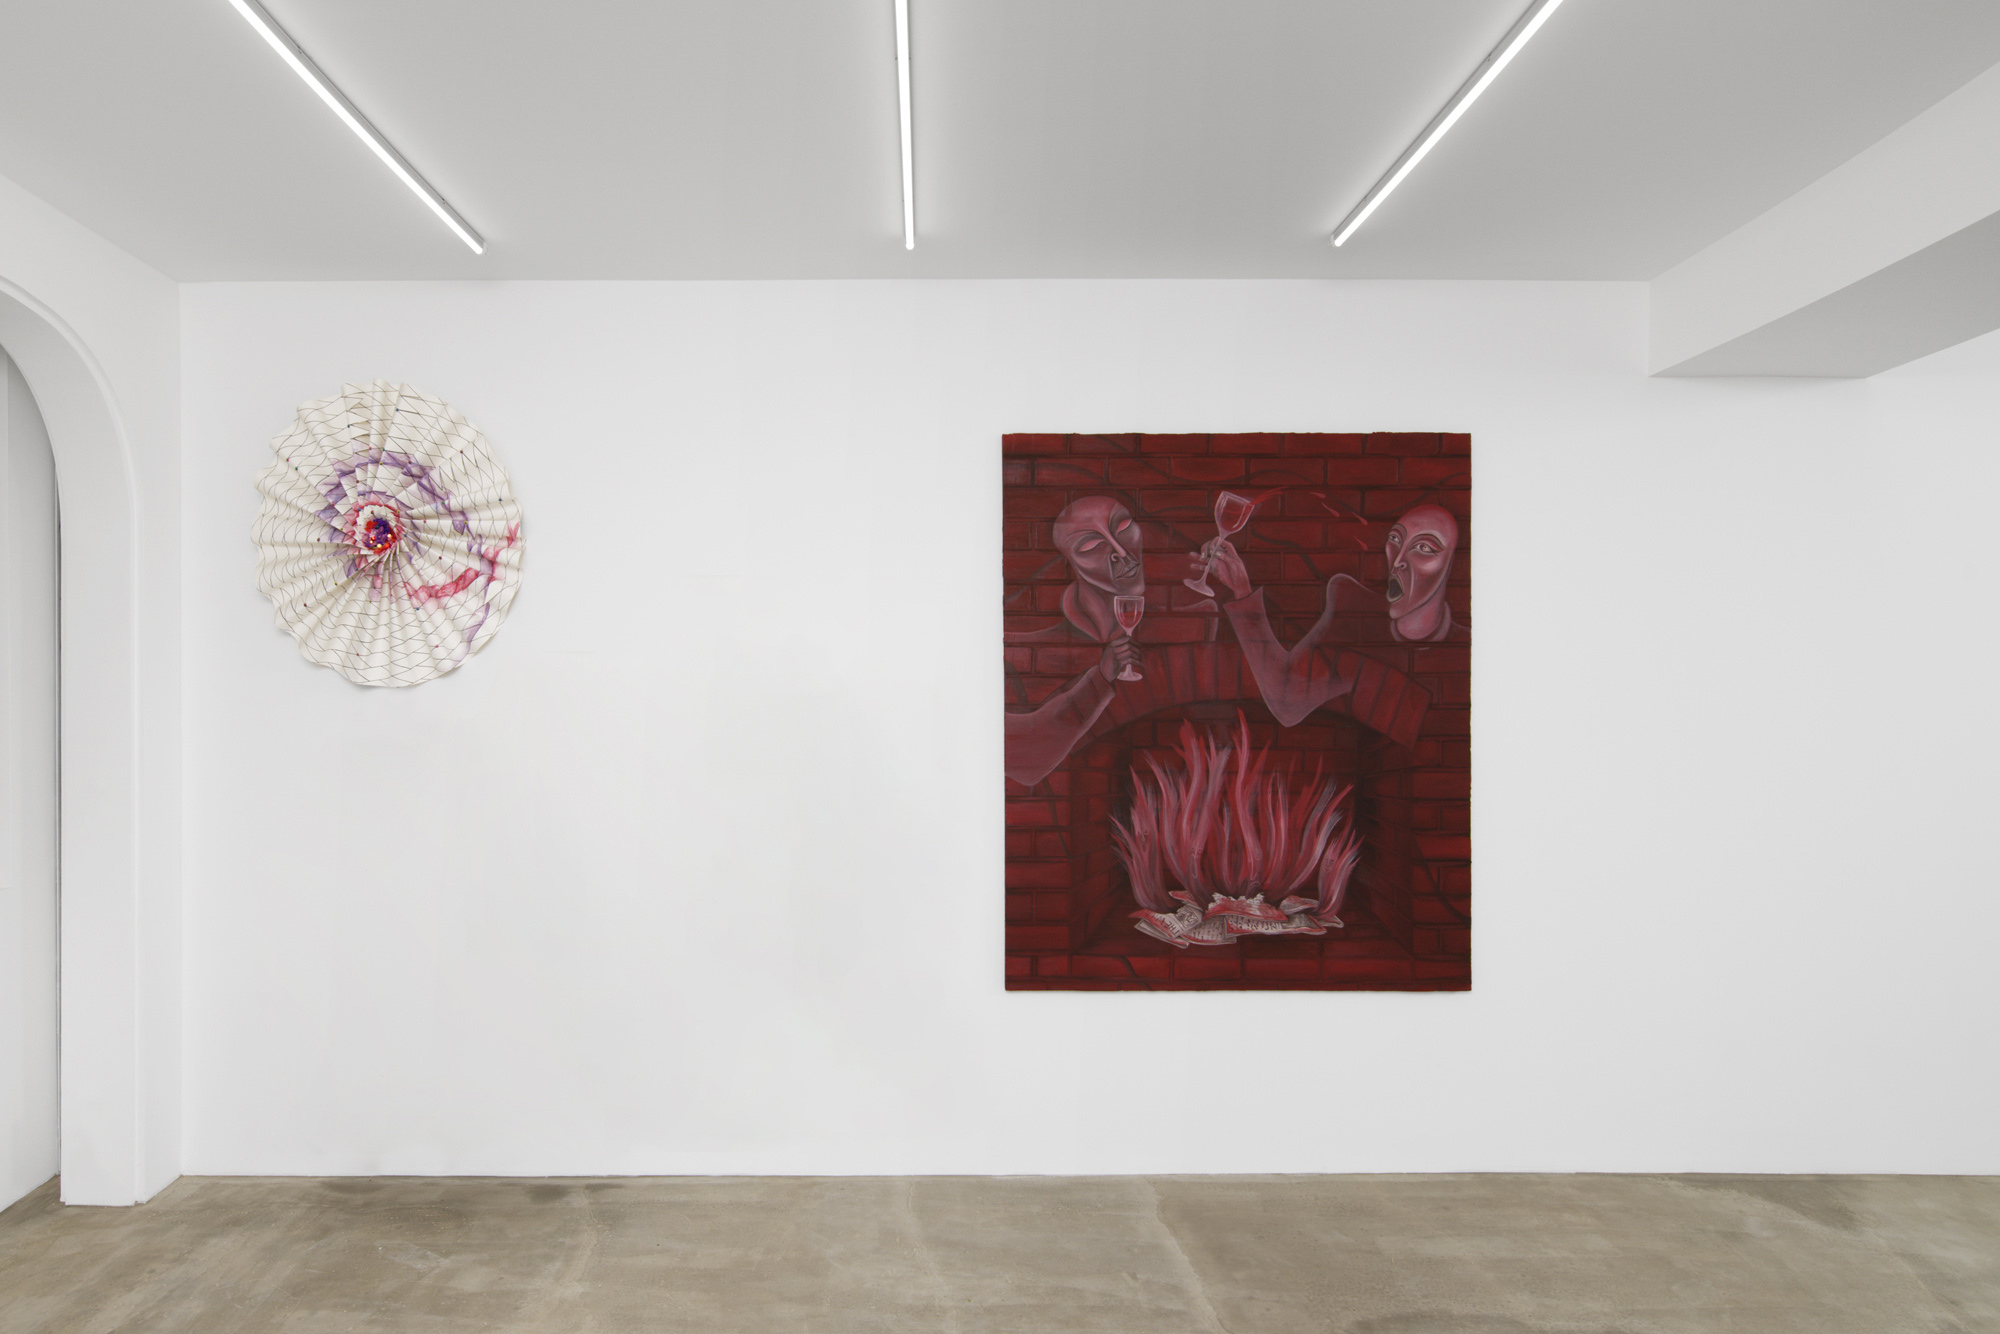 Johanna Odersky, Series of "Ors", 2019, screenprint and watercolor on paper, lightbulbs, wiggly eyes, unique & Tanja Nis-Hansen, A twist in my sobriety, 2018, oil and graphite on canvas, 160 x 140 cm, unique